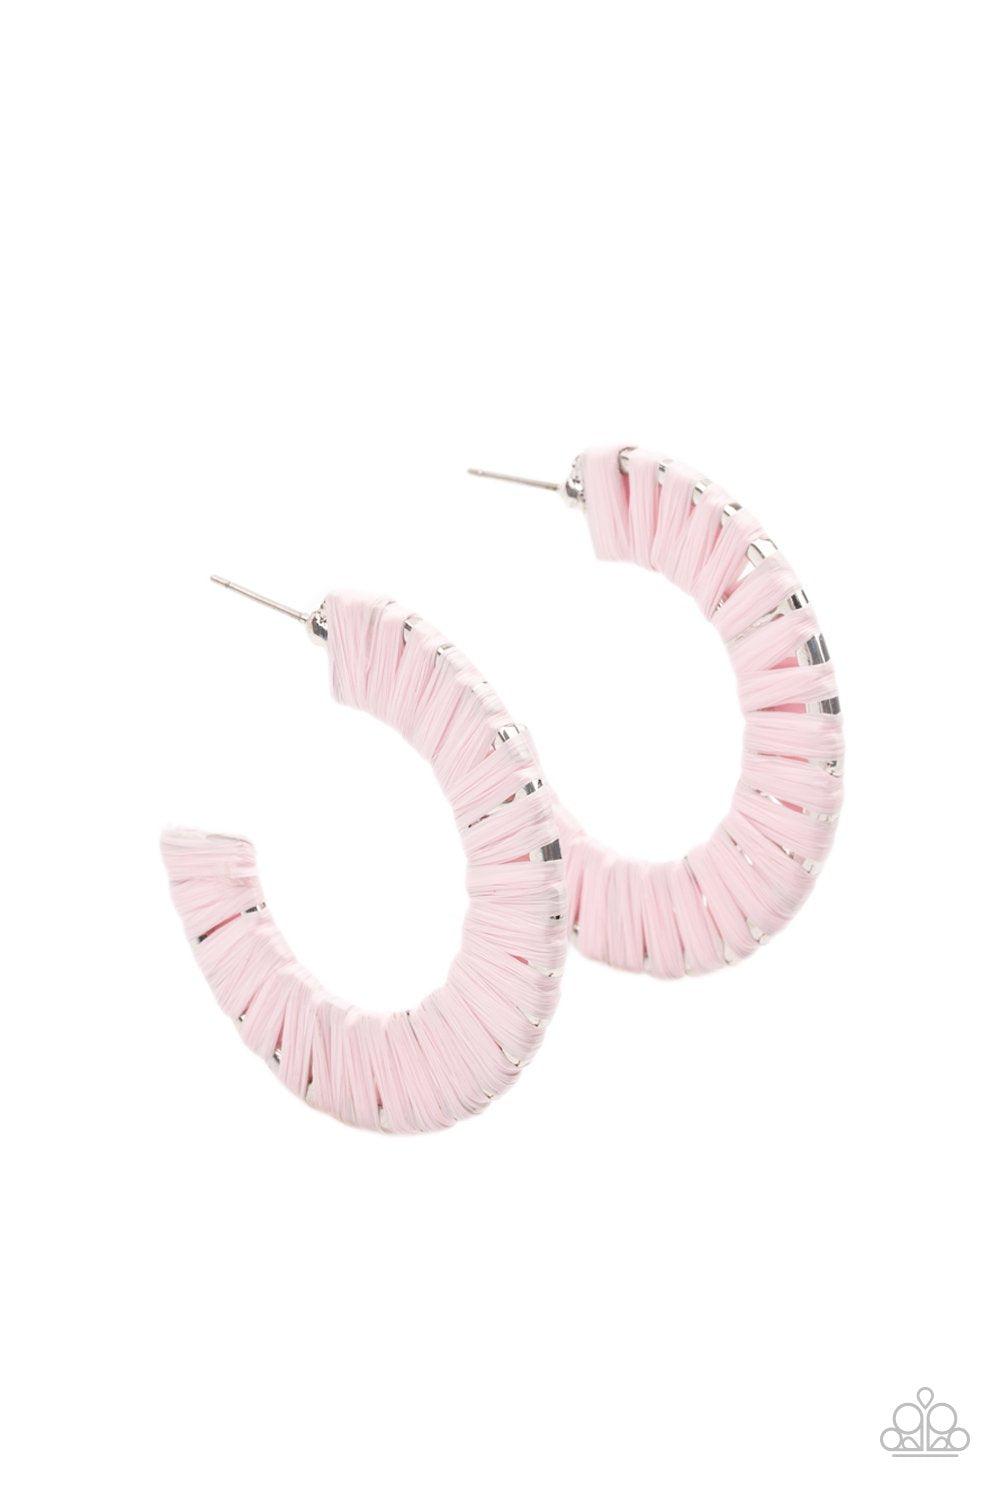 A Chance of RAINBOWS Pink Woven Hoop Earrings - Paparazzi Accessories- lightbox - CarasShop.com - $5 Jewelry by Cara Jewels